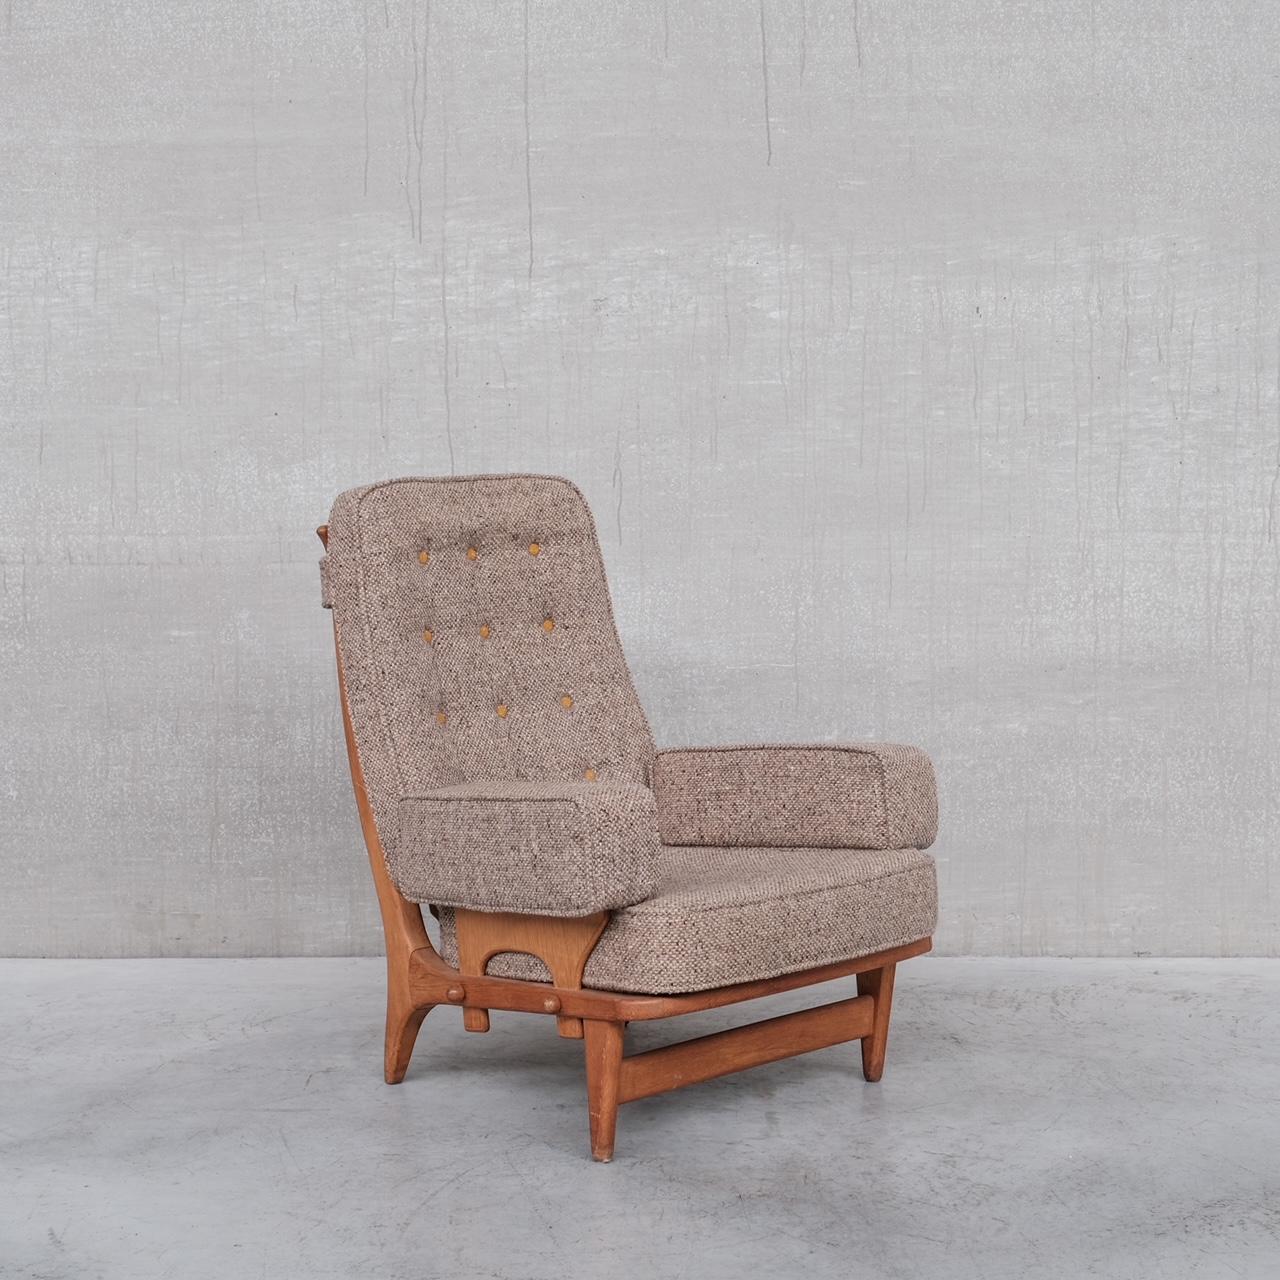 A rare mid 20th upholstered armchair by design legends Guillerme et Chambron. 

France, c1960s. 

Single armchair. 

Oak framed with original upholstery. 

A rare model we have not managed to have before. 

The upholstery remains in